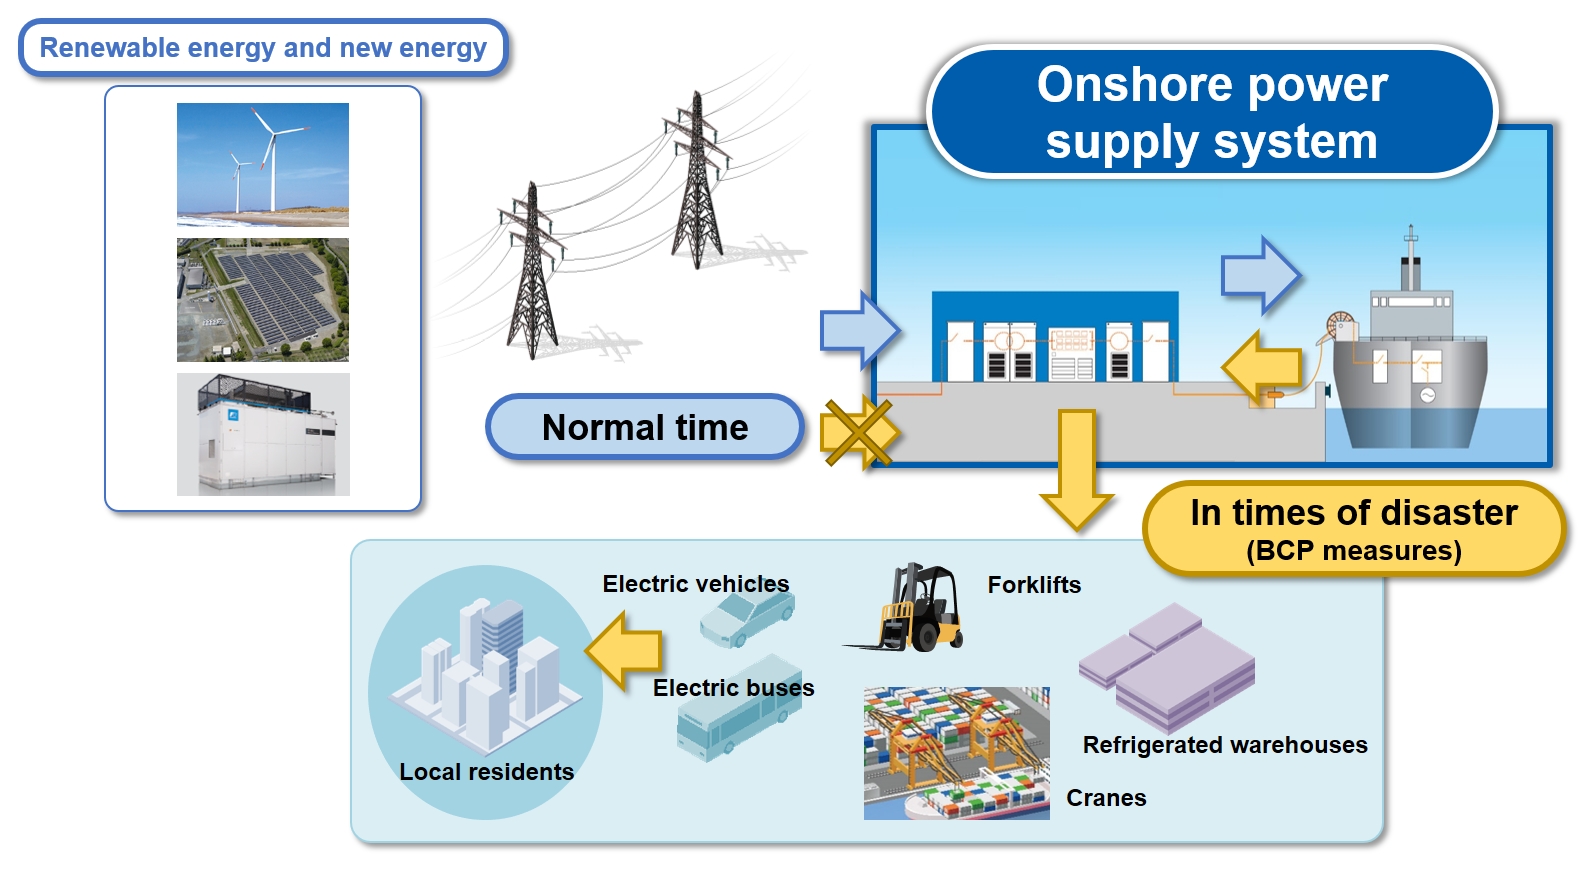 Concept for onshore power supply systems during disasters